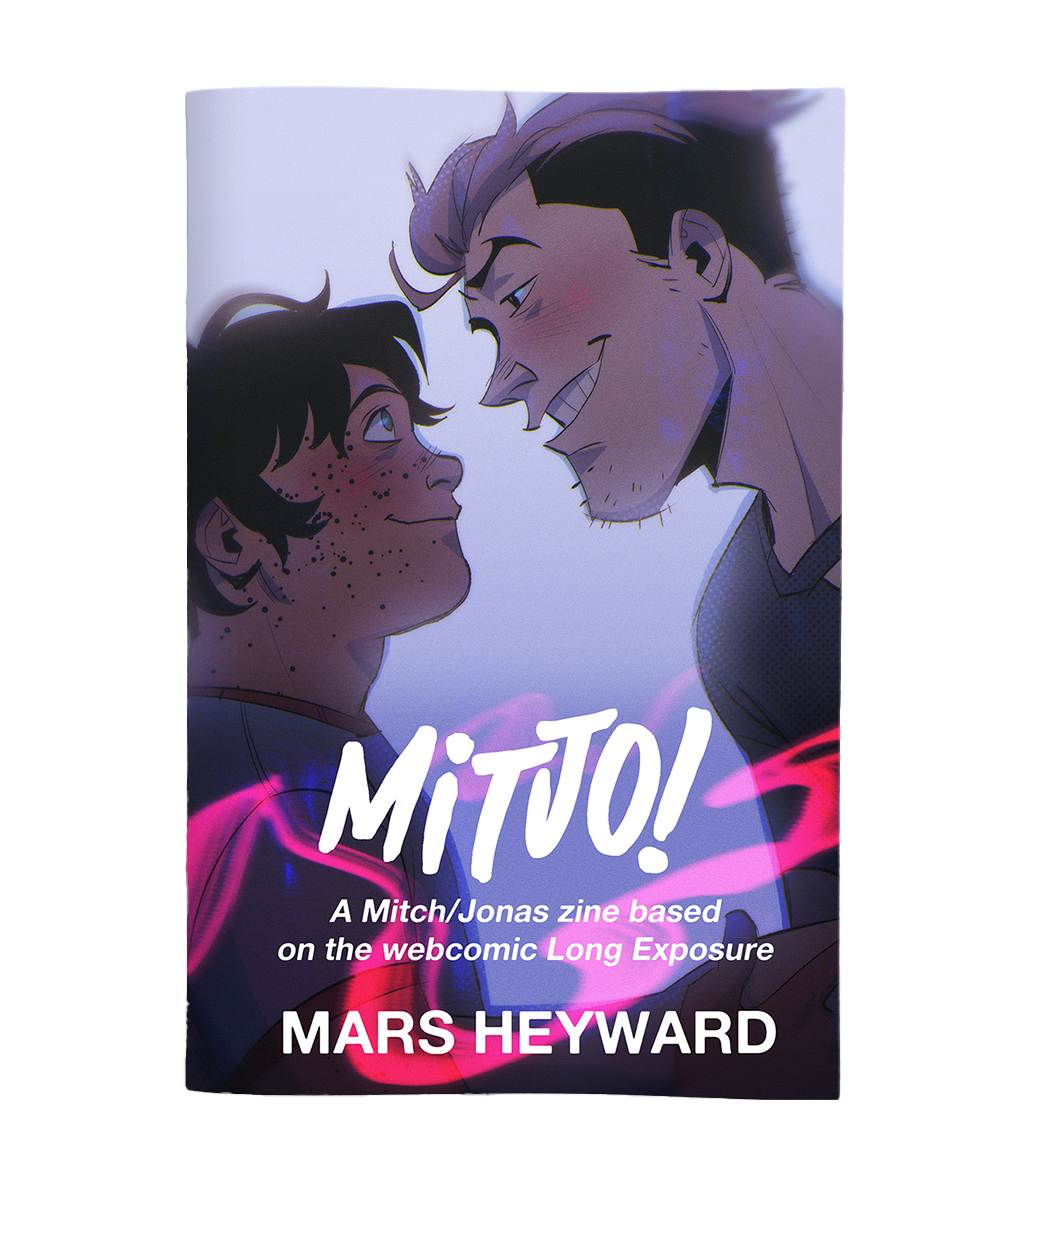 A zine cover from Mars Heyward. The cover is a picture of two men looking into each other's eyes with smiles on their face. The text reads "A Mitch/Jonas zine based on the webcomic Long Exposure". 